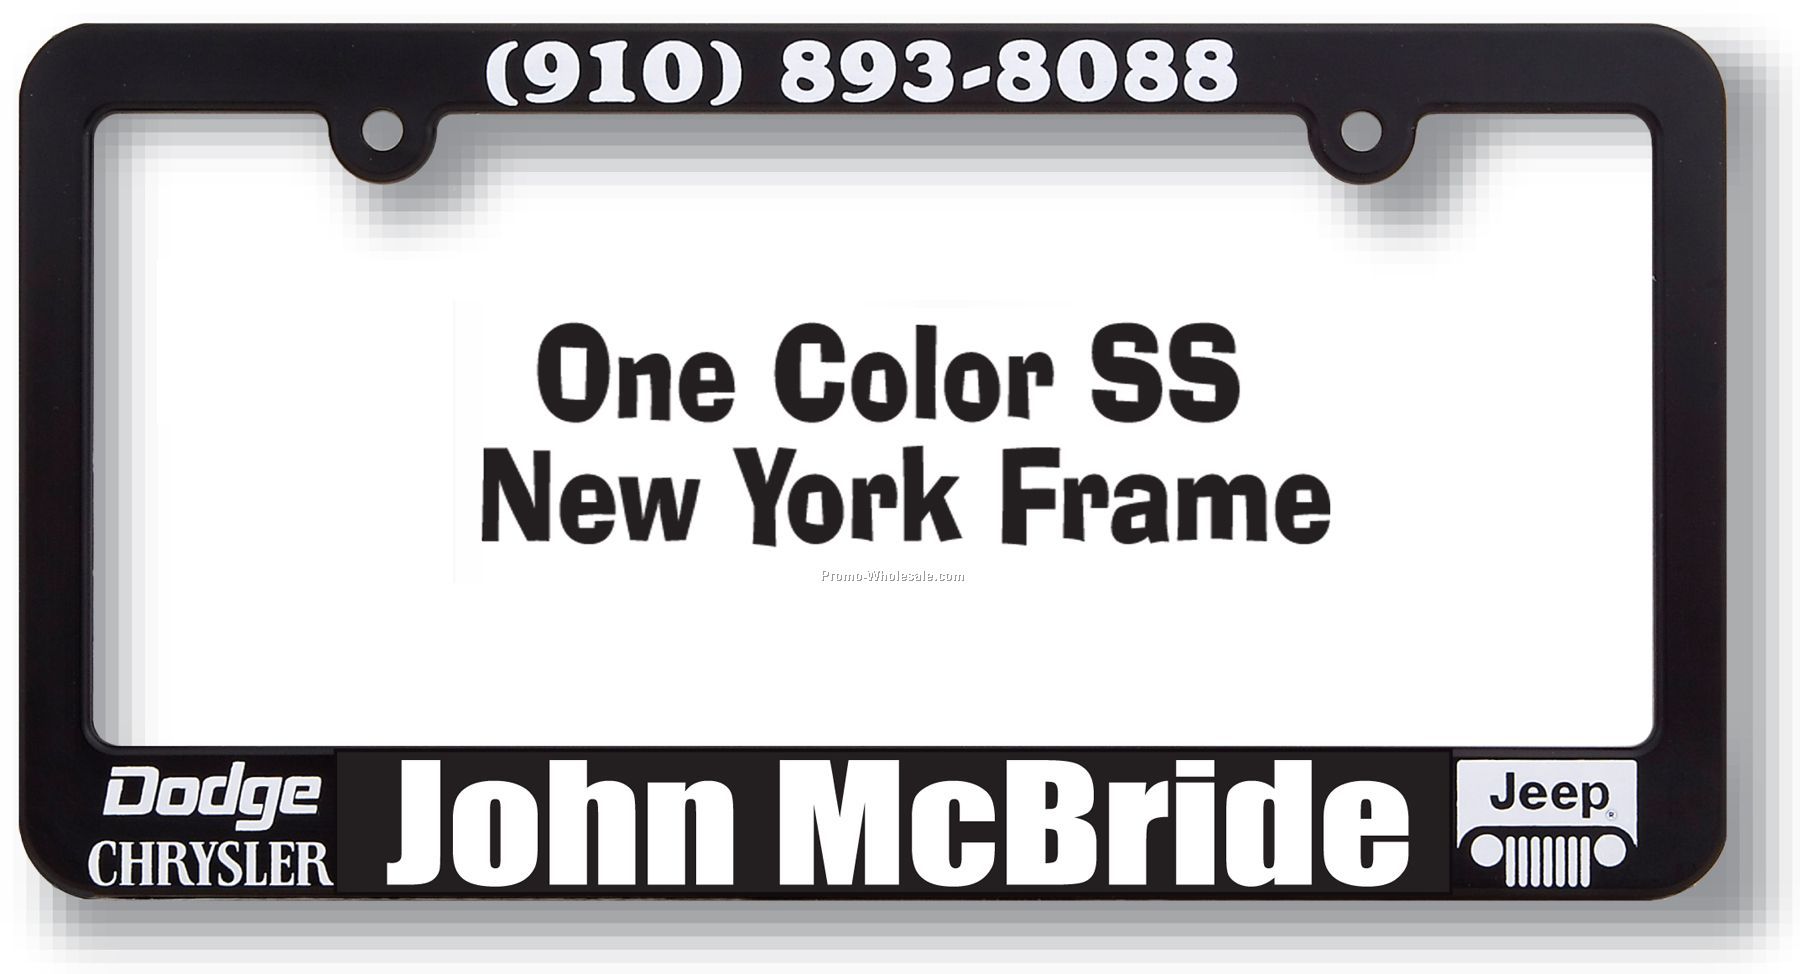 Silk Screen Plastic License Plate Frame With 1 Color Imprint